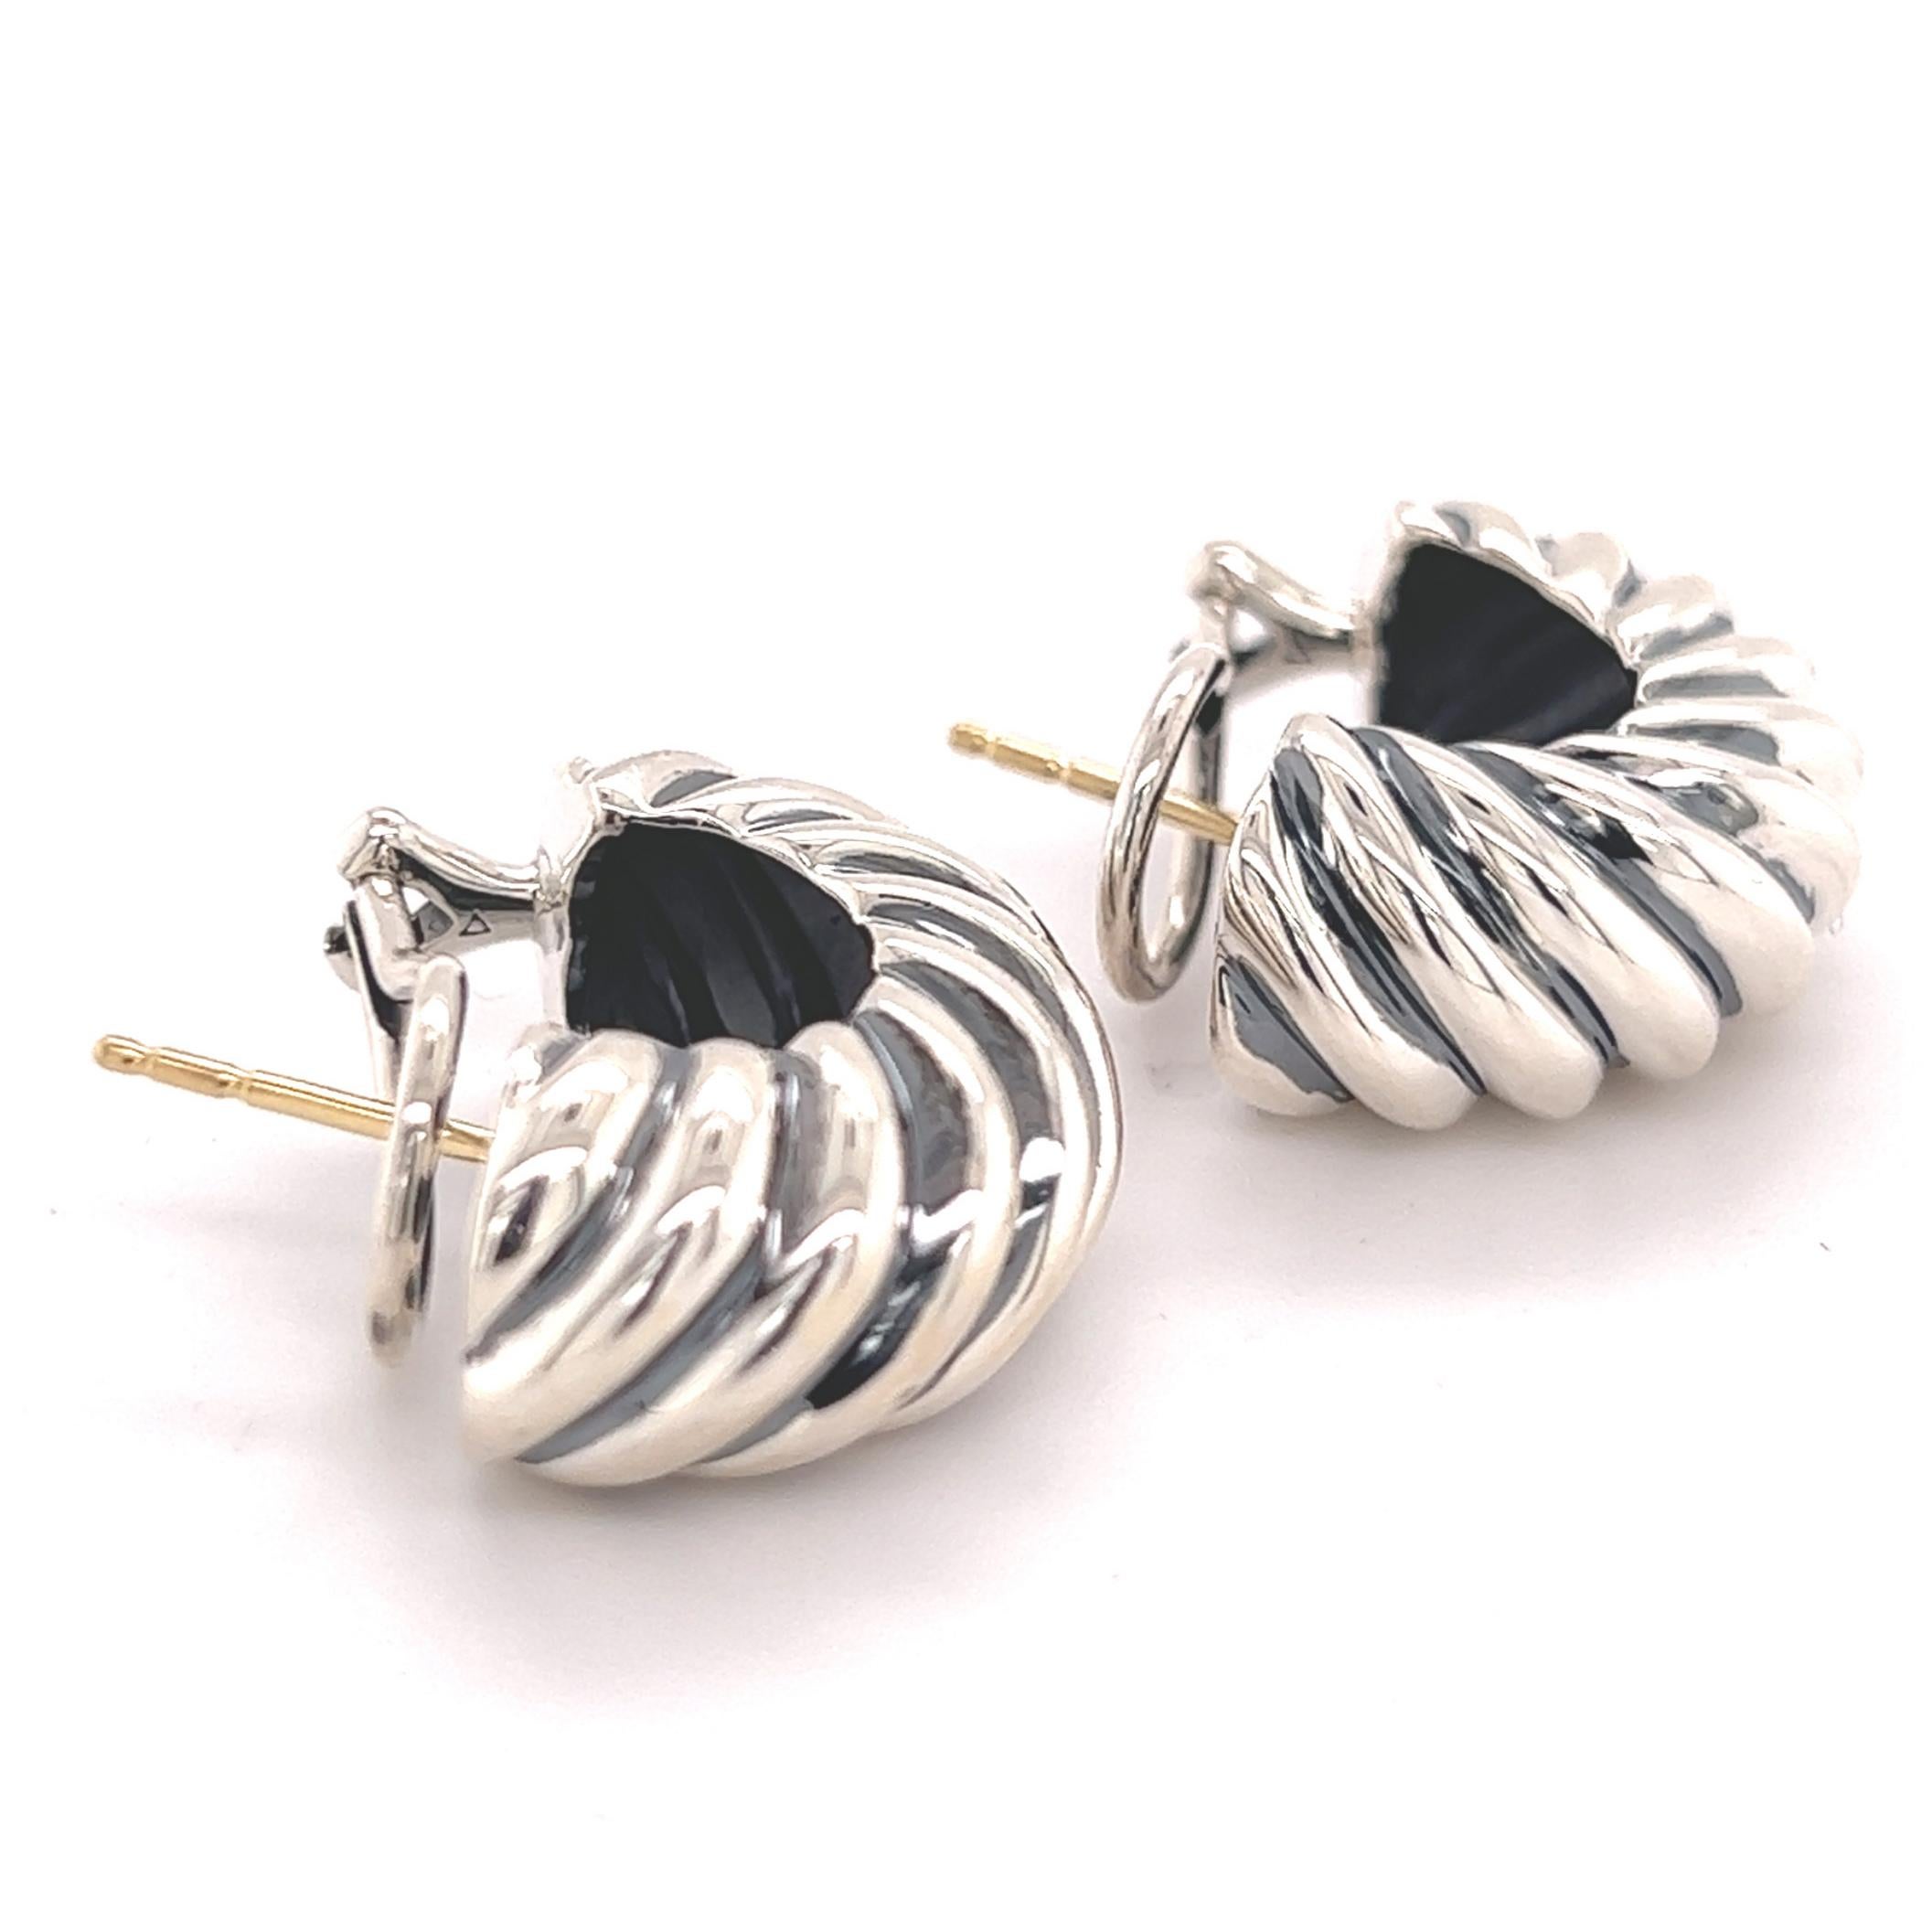 David Yurman Estate Shrimp Earrings with Omega Backs Sterling Silver DY76

These elegant Authentic David Yurman Shrimp earrings have a weight of 12.3 Grams.

TRUSTED SELLER SINCE 2002
PLEASE SEE OUR HUNDREDS OF POSITIVE FEEDBACKS FROM OUR